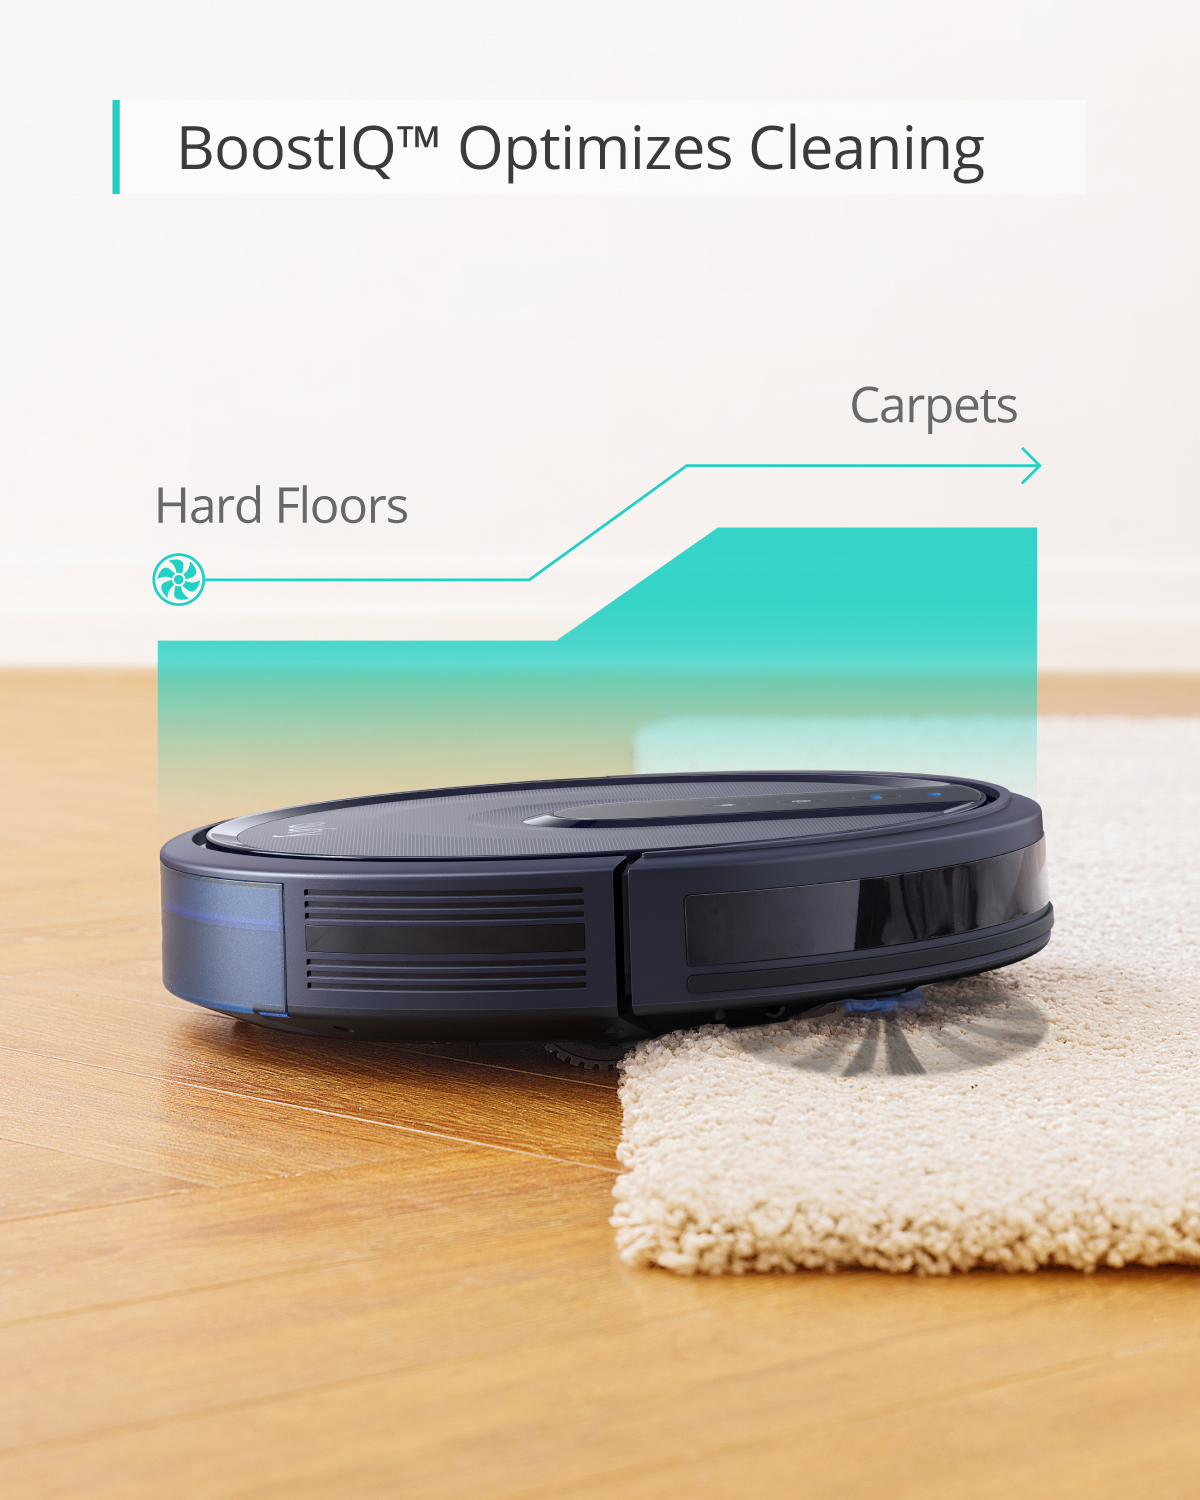 Anker eufy 25C Wi-Fi Connected Robot Vacuum, Great for Picking up Pet Hairs, Quiet, Slim - image 6 of 9